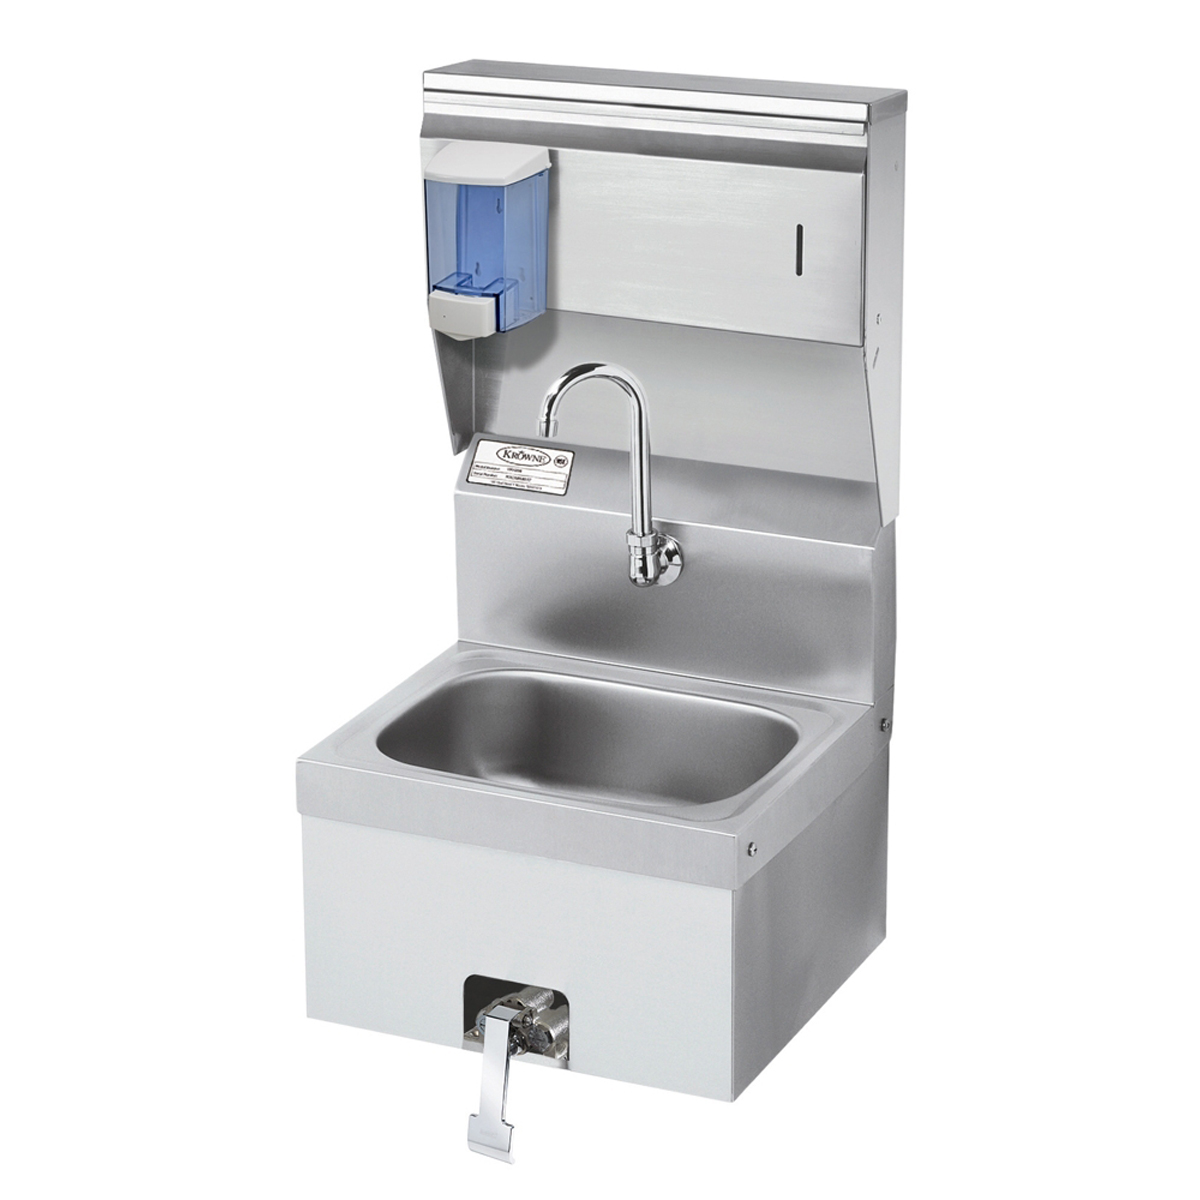 Krowne Metal 16" Wide Hand Sink with Knee Valve and Soap & Towel Dispenser, HS-16